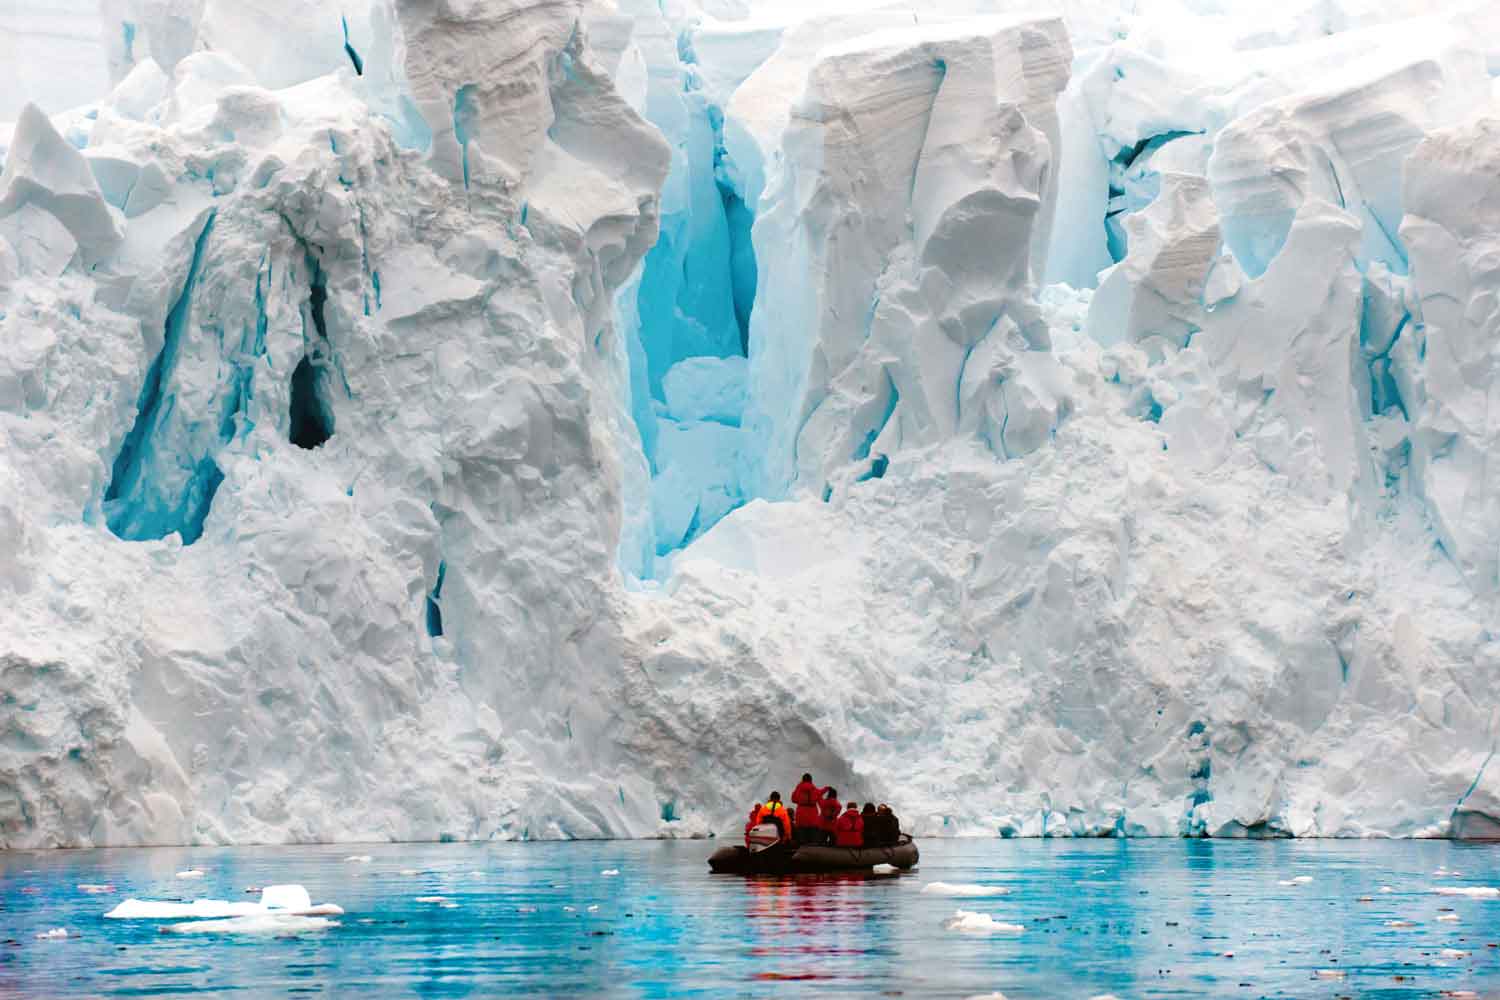 People in an inflatable vessel approach a giant glacier.